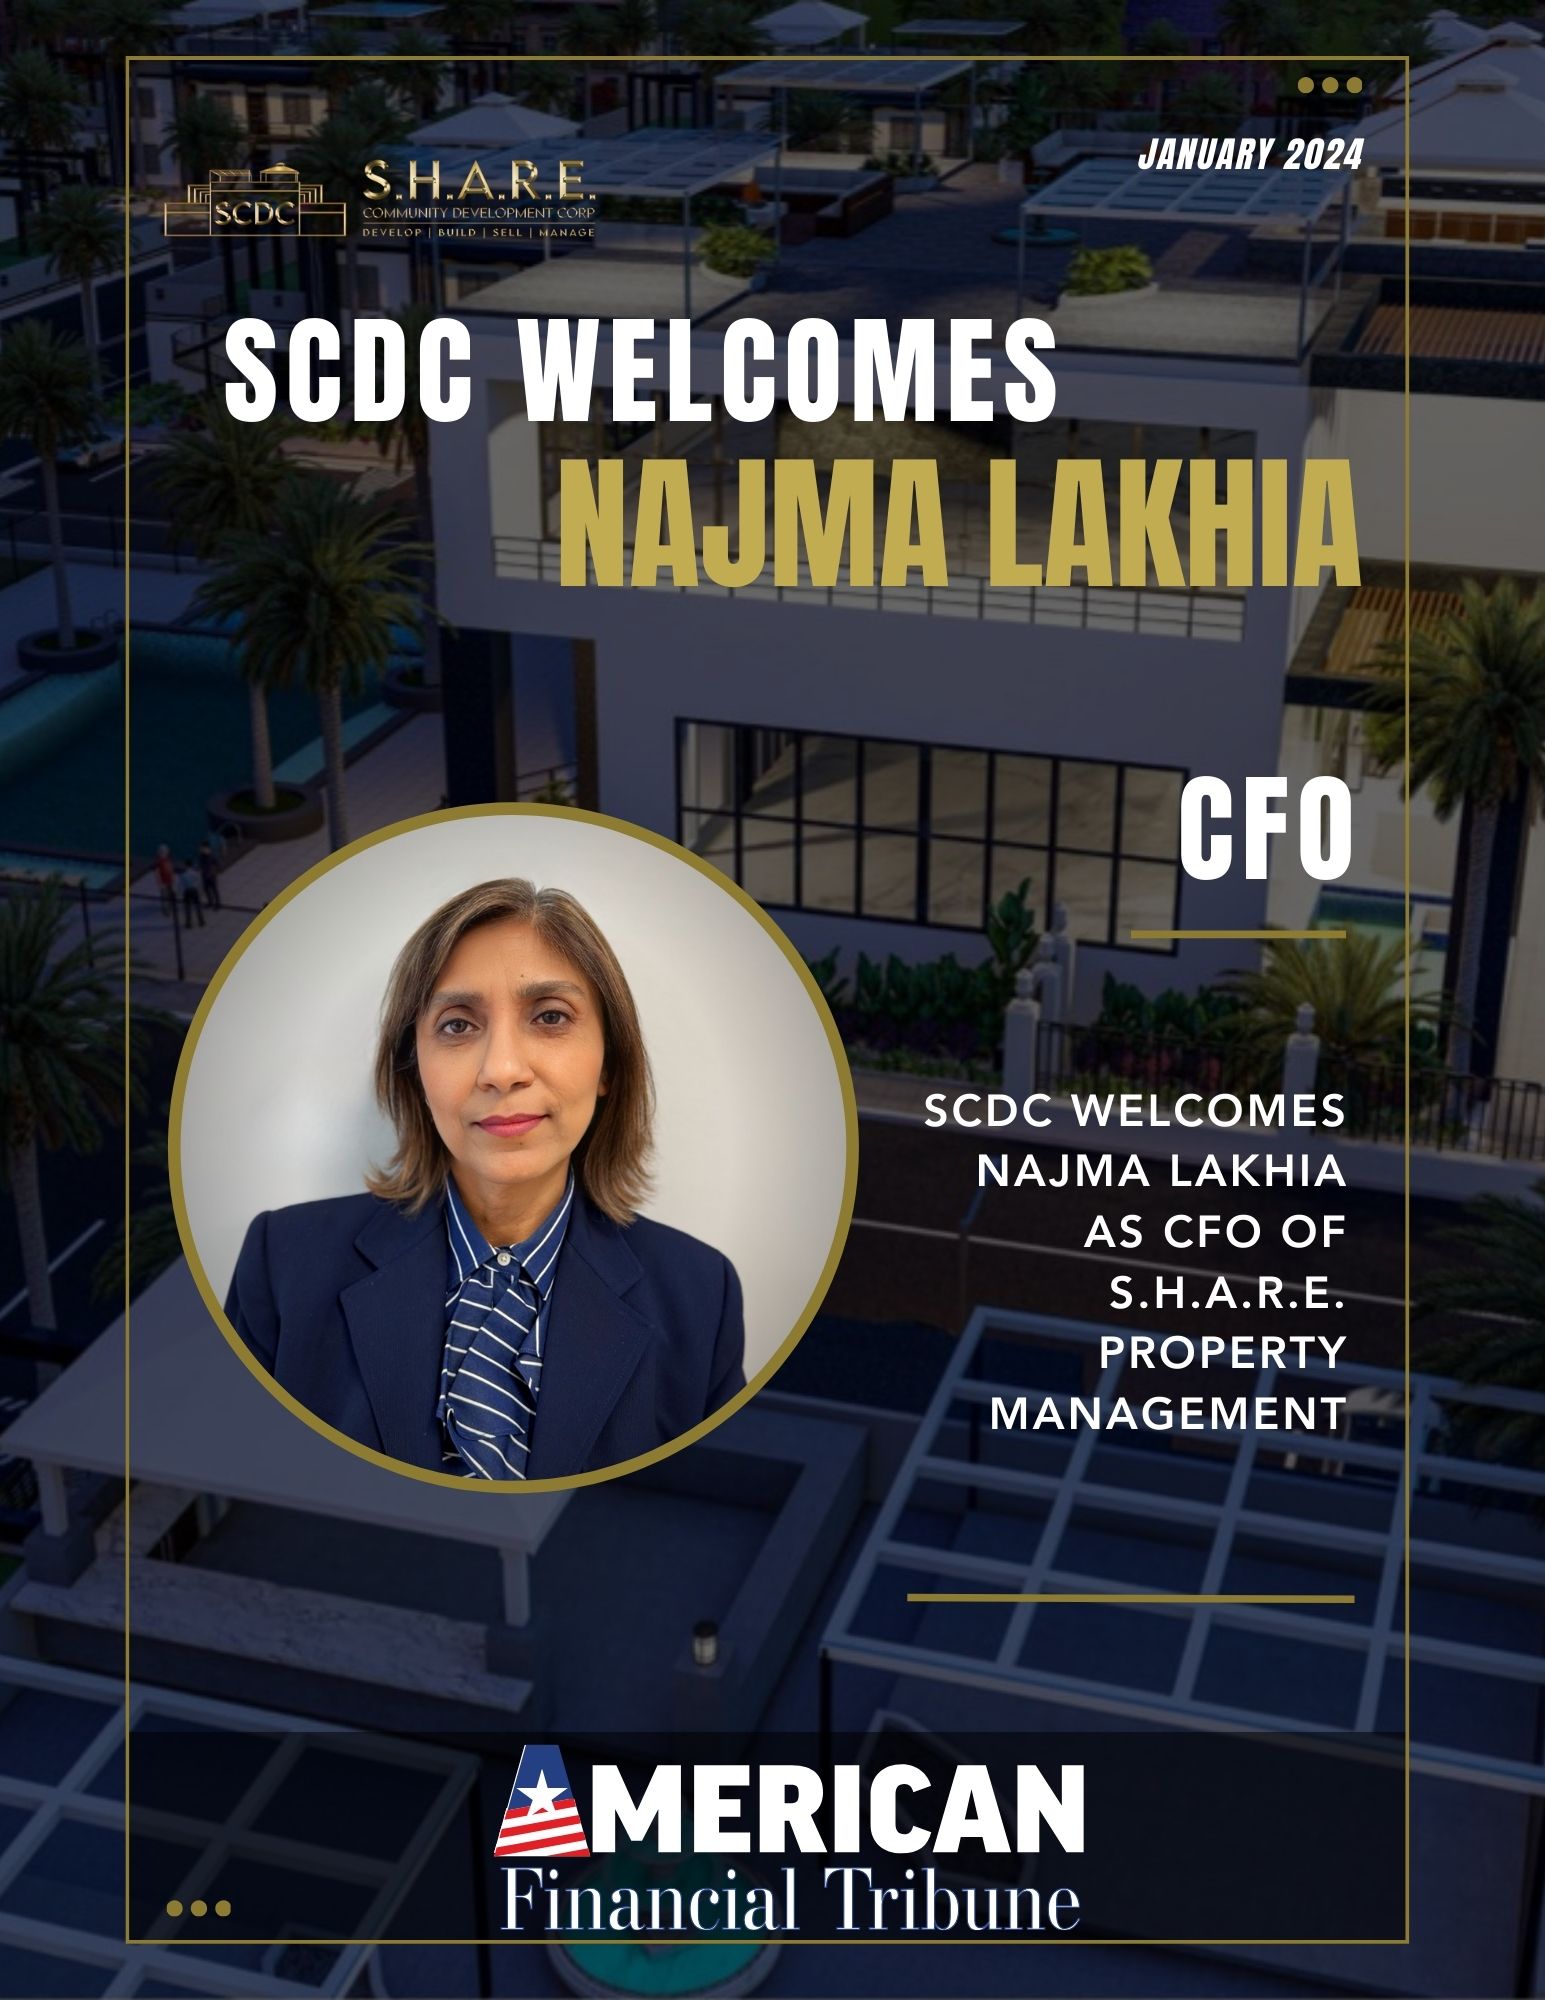 SCDC Proudly Welcomes Najma Lakhia as Chief Financial Officer of S.H.A.R.E. Property Management